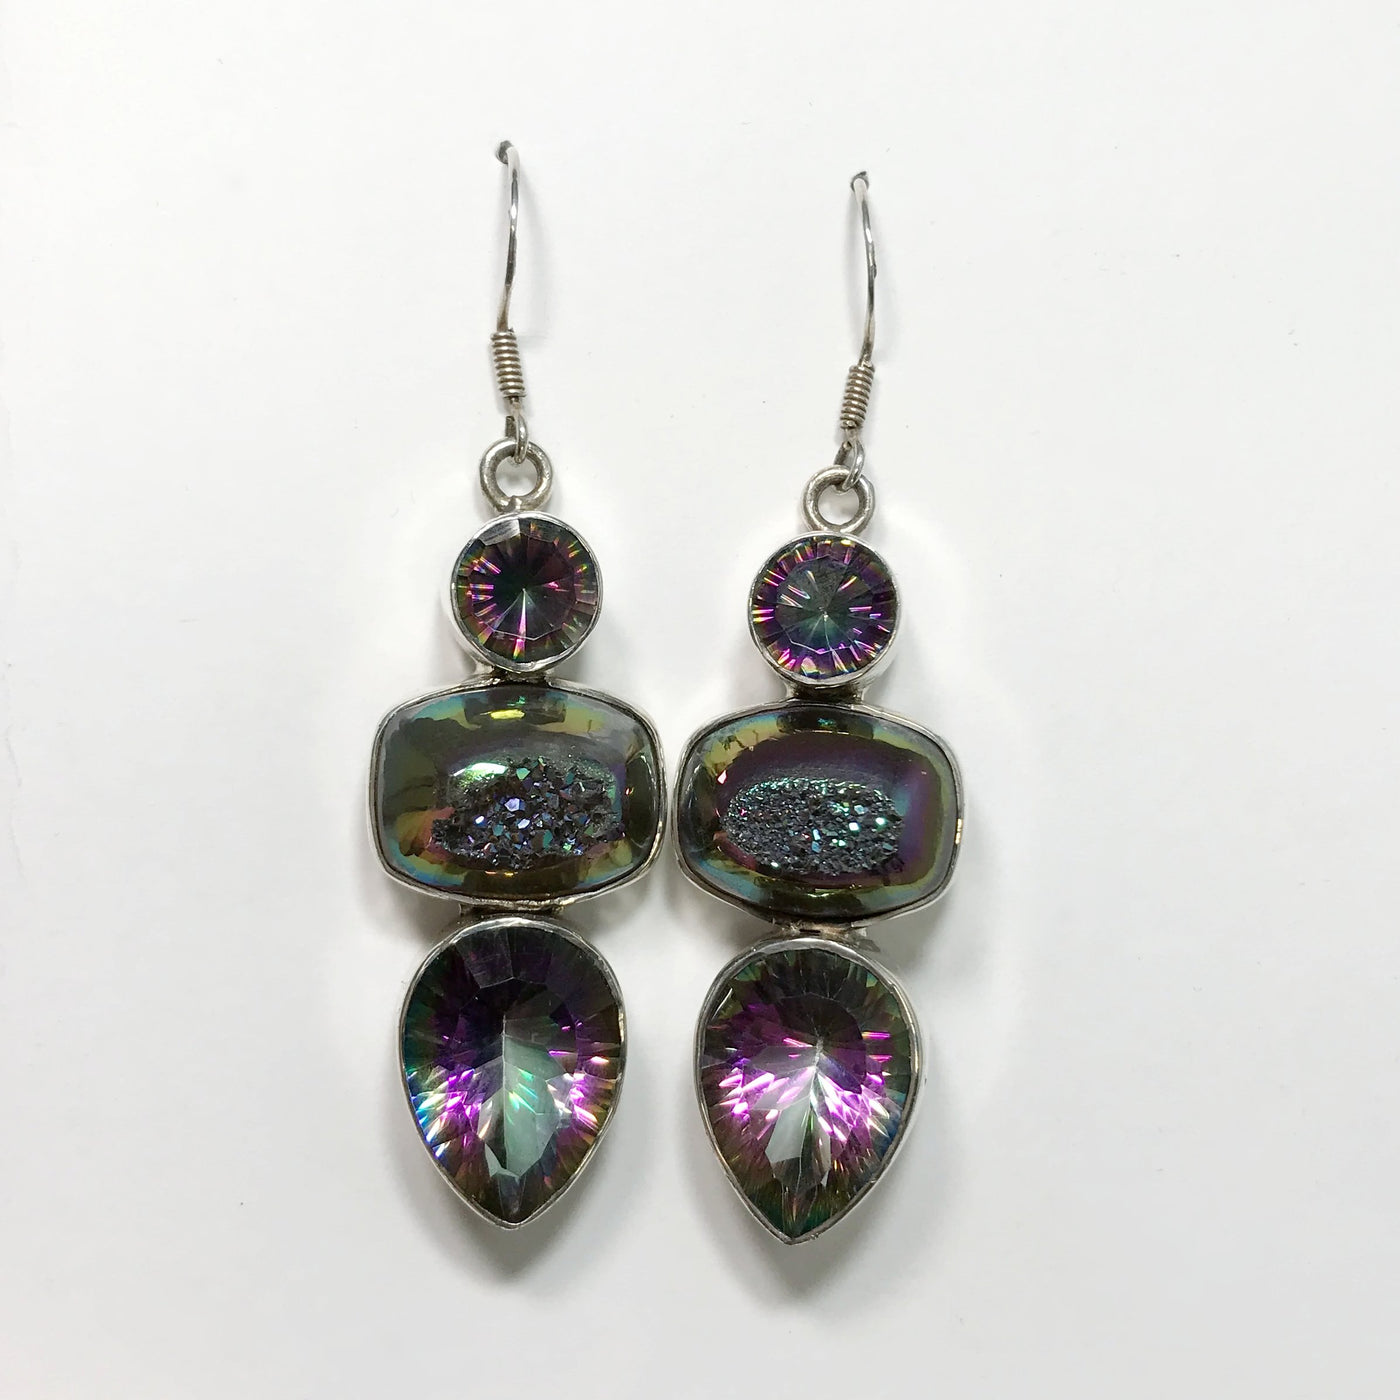 Mystic Topaz and Druzy Necklace and Earrings Set